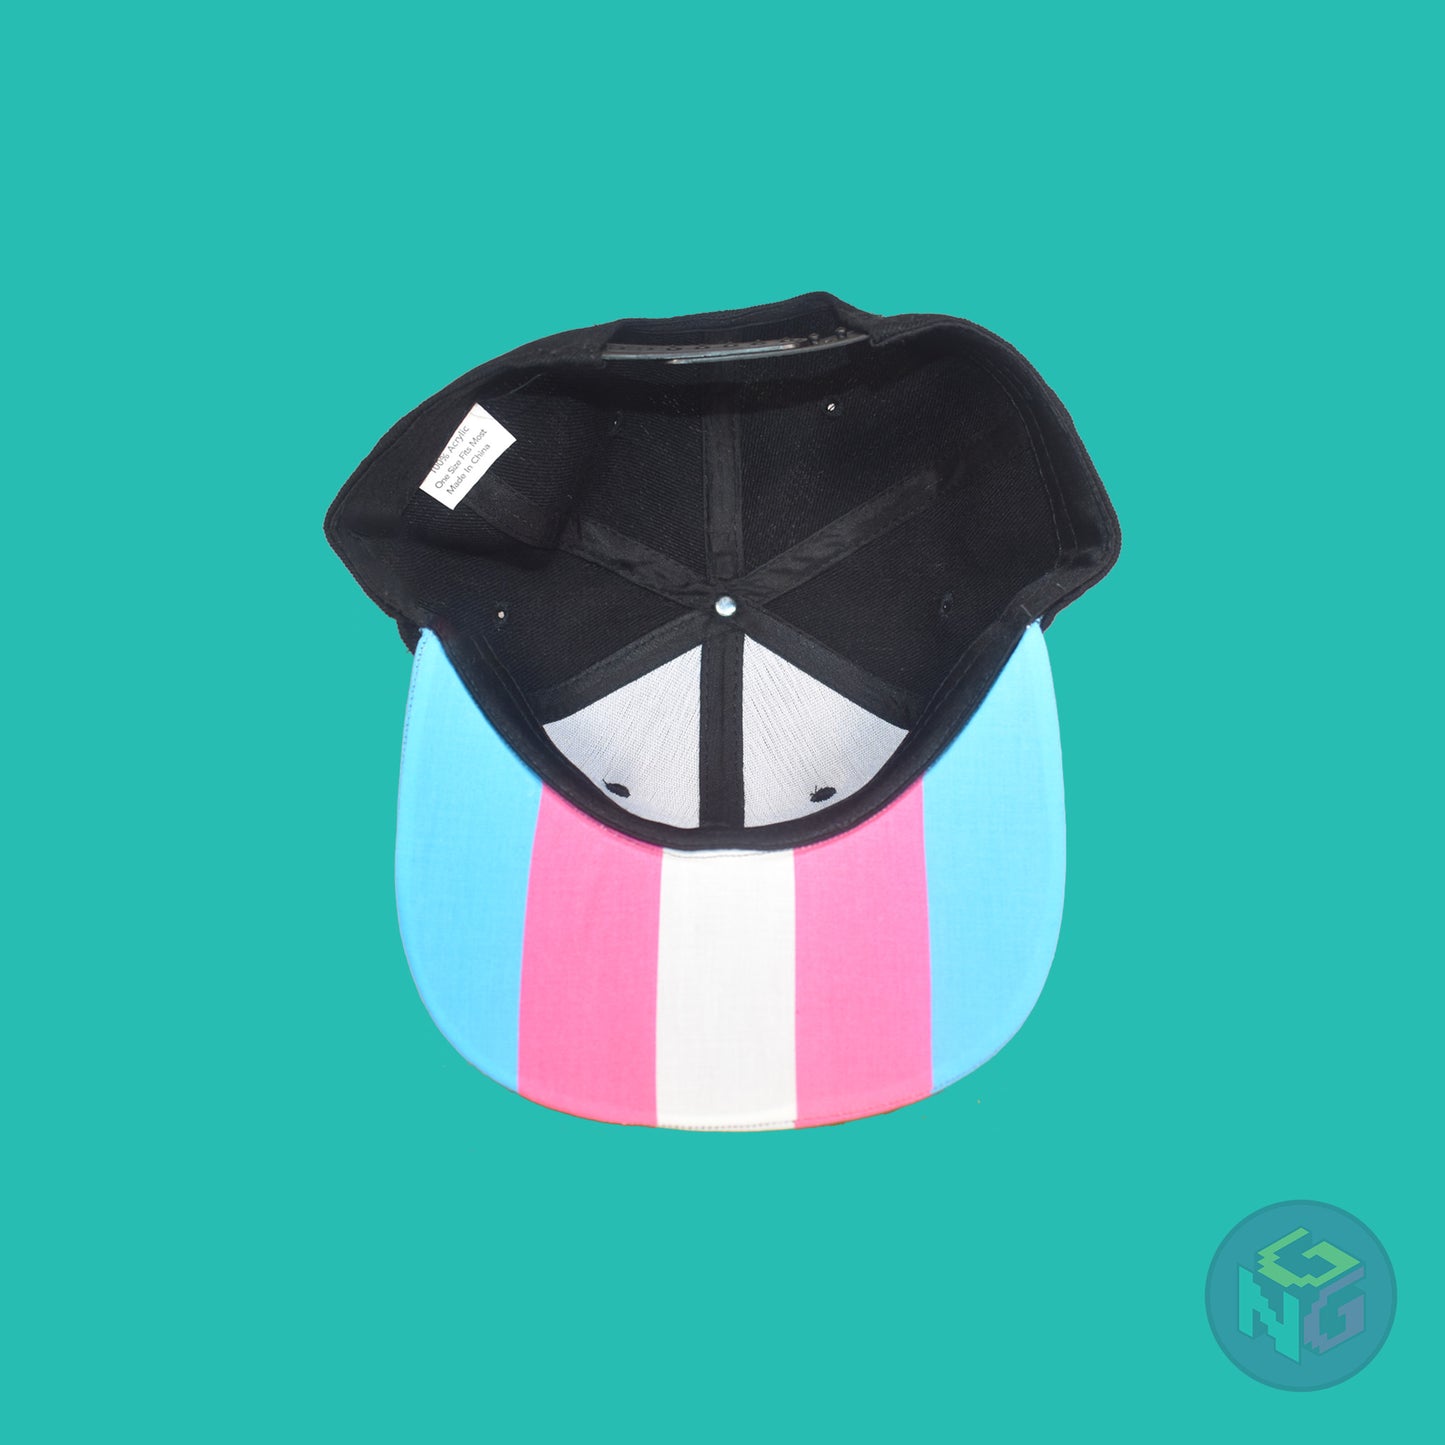 Black flat bill snapback hat. The brim has the transgender pride flag on both sides and the front of the hat has the word “TRANS” in blue, pink, and white letters. Underside view